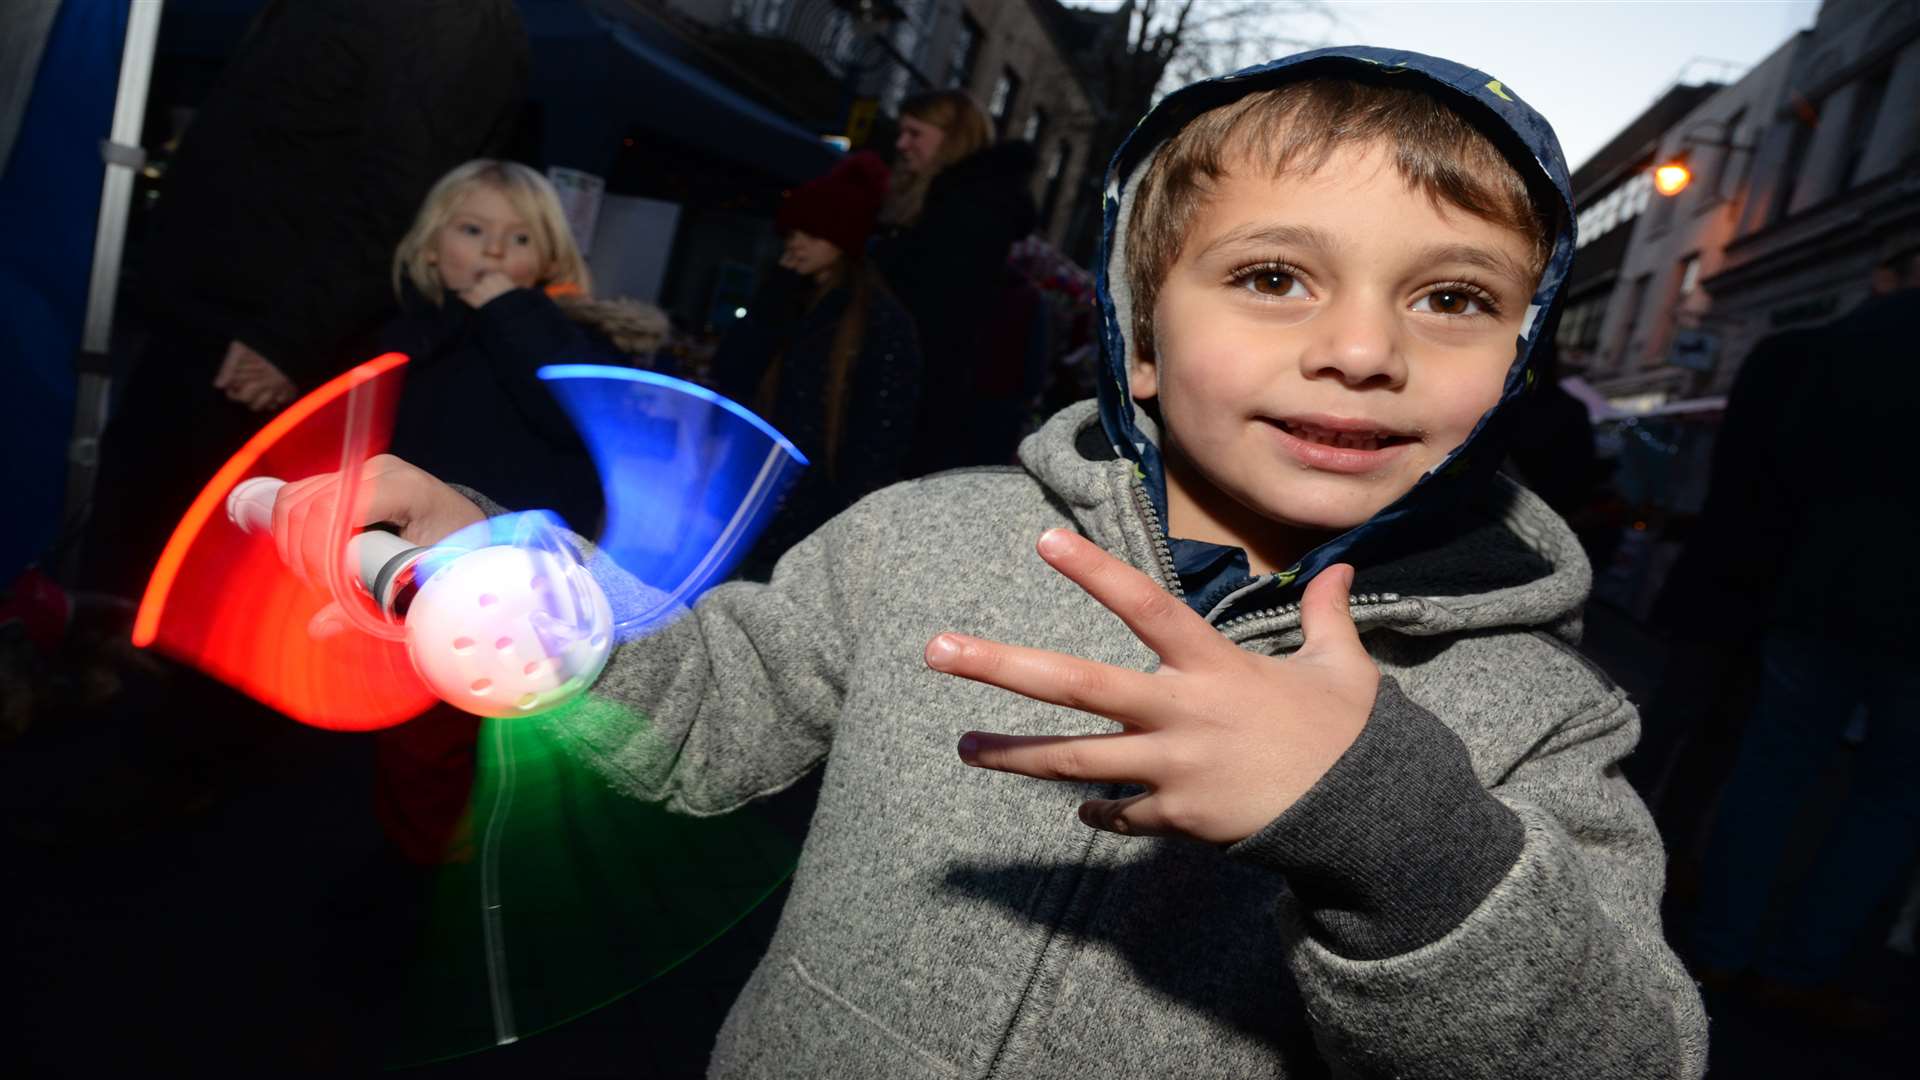 Kian, four, with his own personal illuminations